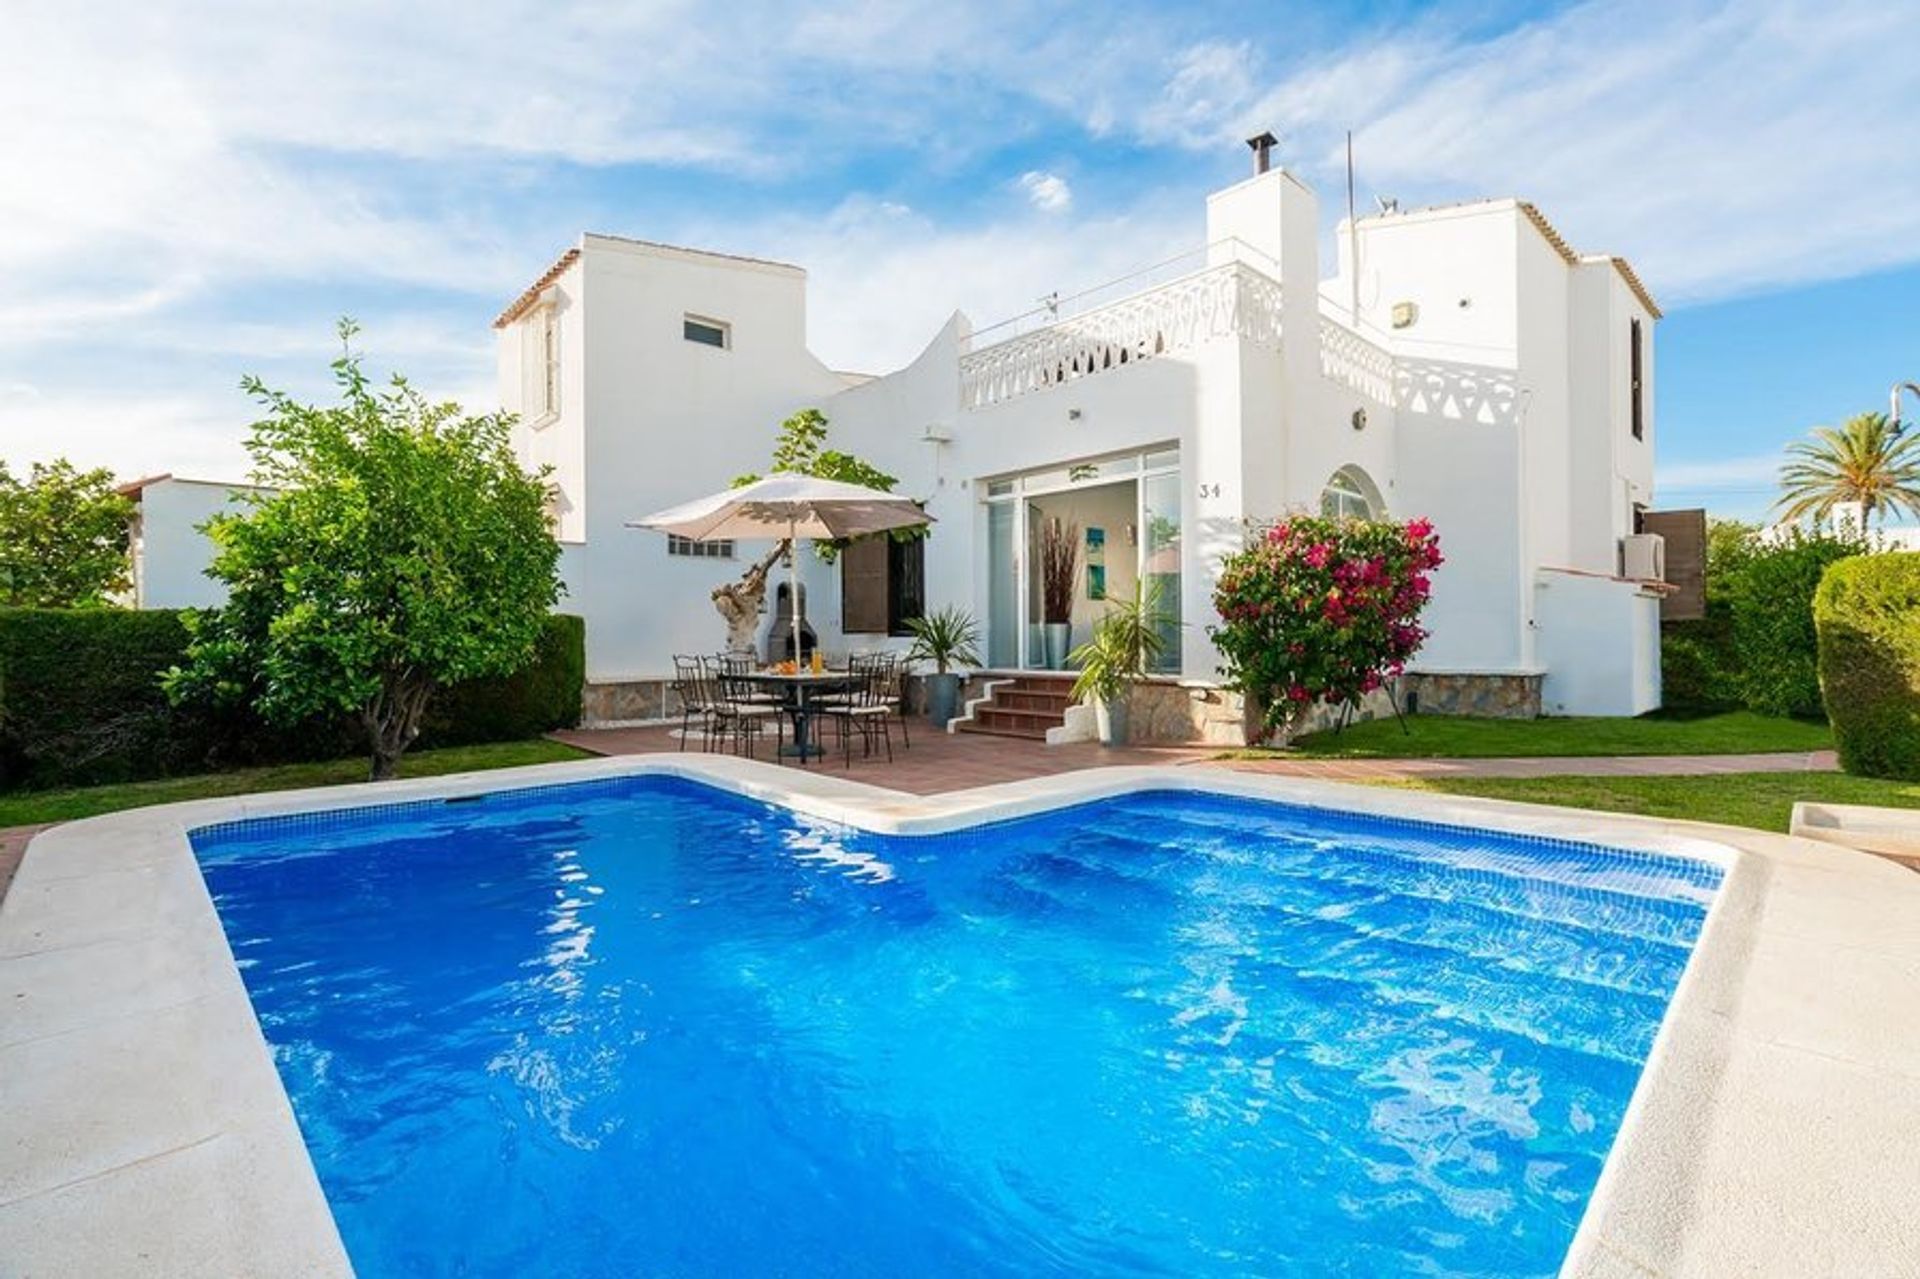 Explore our villas with private pools near the golf and beaches